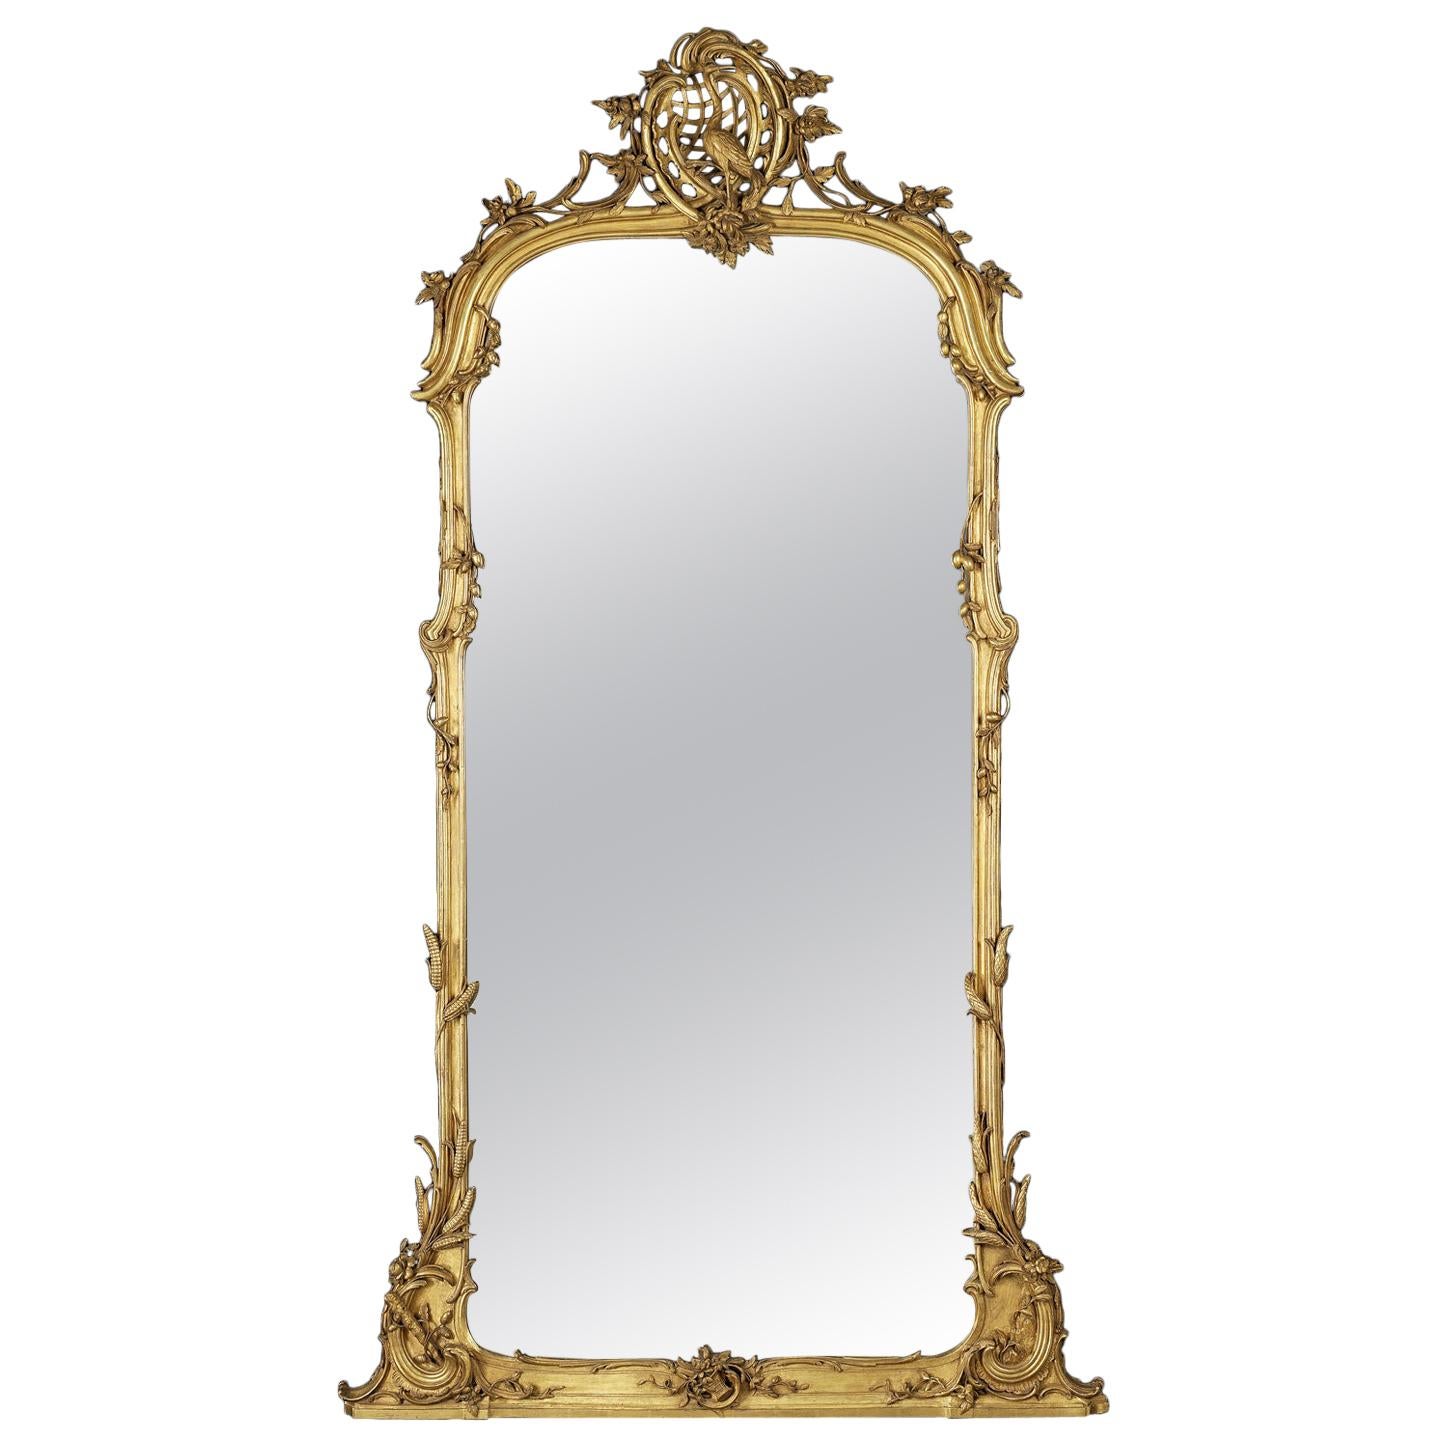 Very Fine Carved Giltwood Mirror, circa 1860